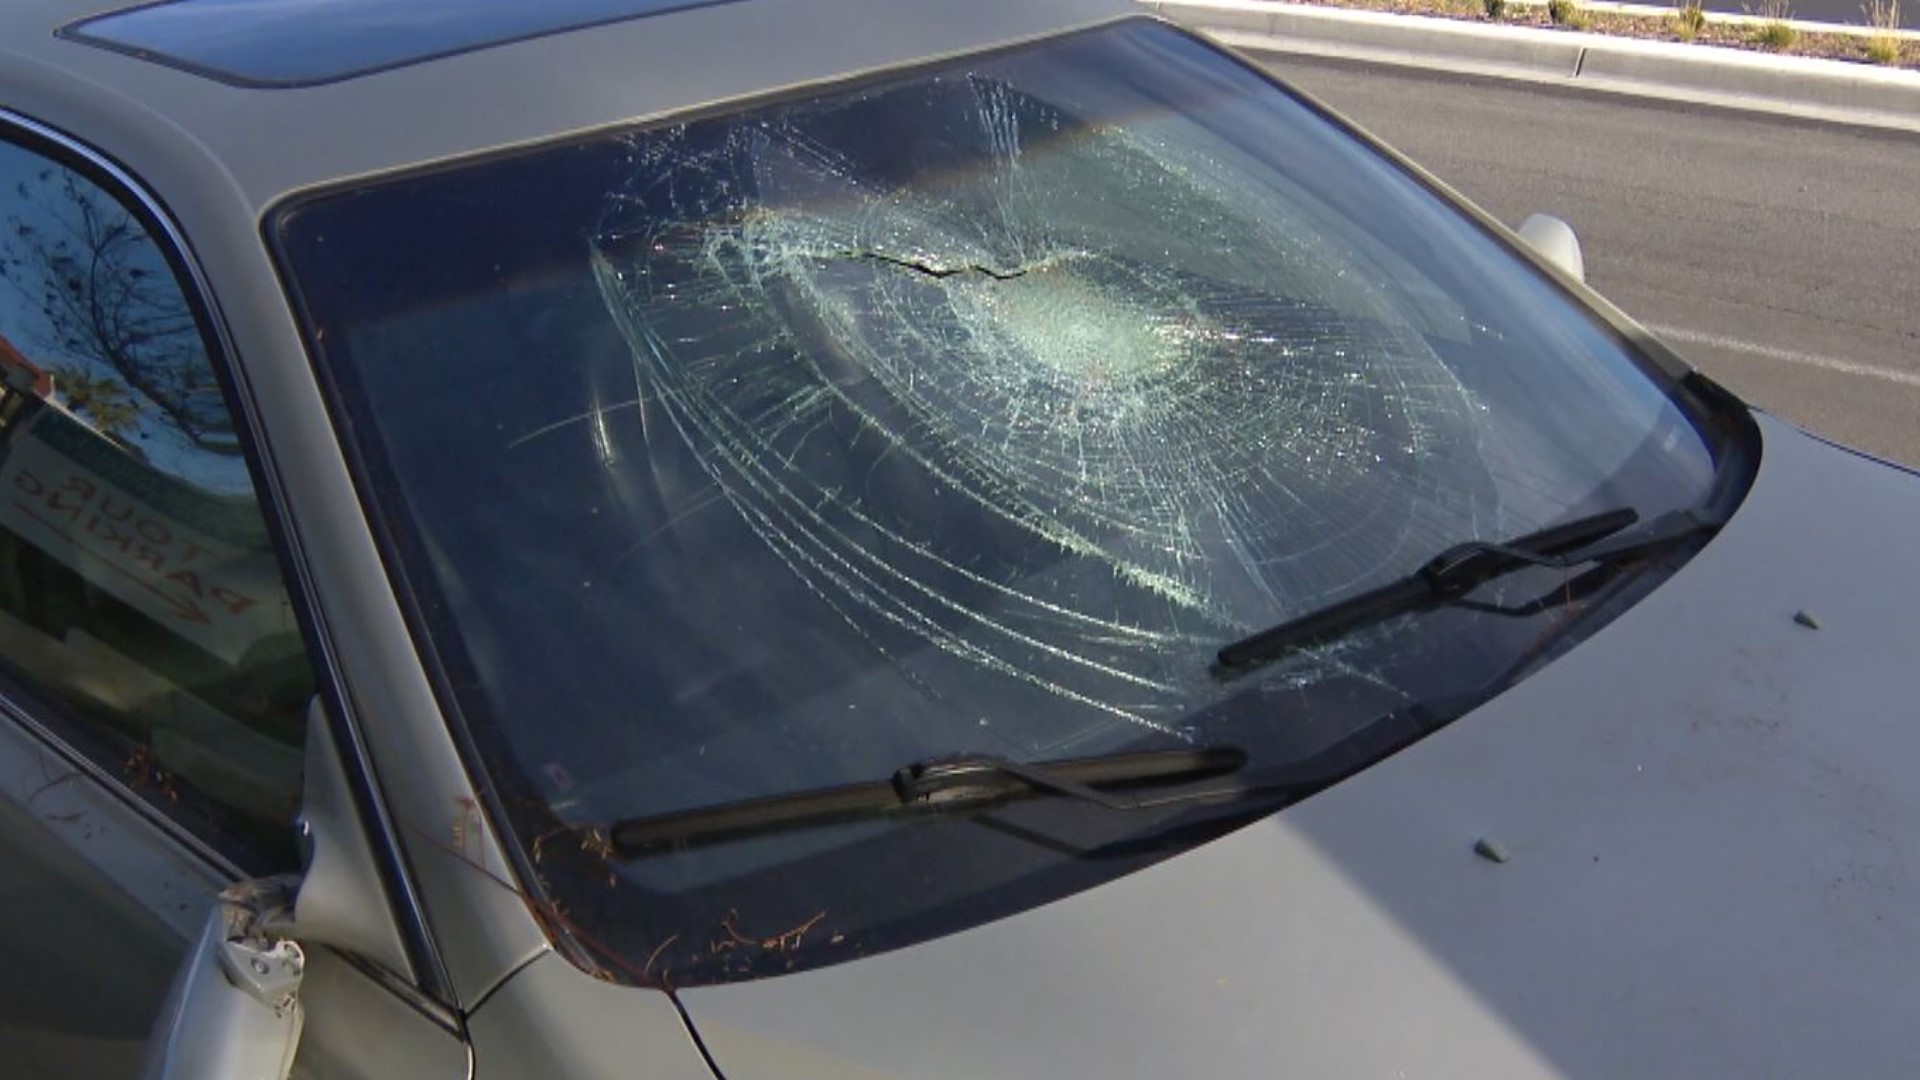 San Diego Police are asking the public for information after several cars were vandalized overnight in multiple San Diego communities.